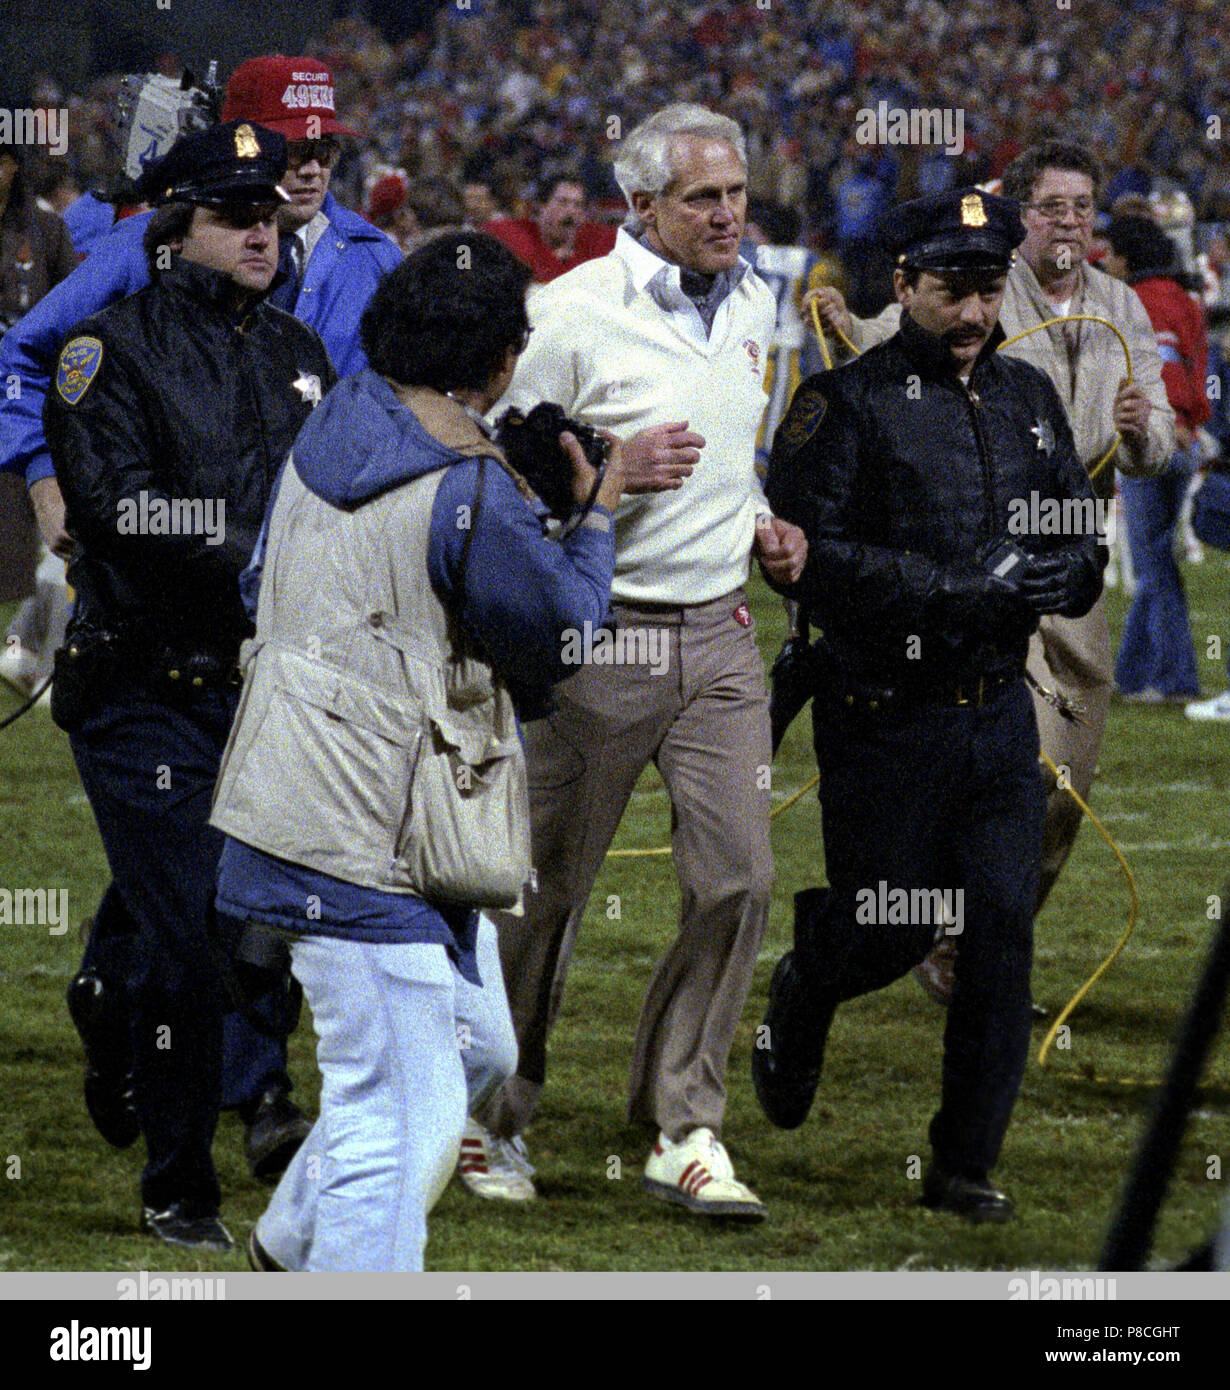 San Francisco, California, USA. 14th Dec, 1984. San Francisco 49ers vs. Los Angles Rams at Candlestick Park Sunday, December 14, 1984. 49ers beat the Rams 19-16. 49ers Head Coach Bill Walsh after game. Credit: Al Golub/ZUMA Wire/Alamy Live News Stock Photo